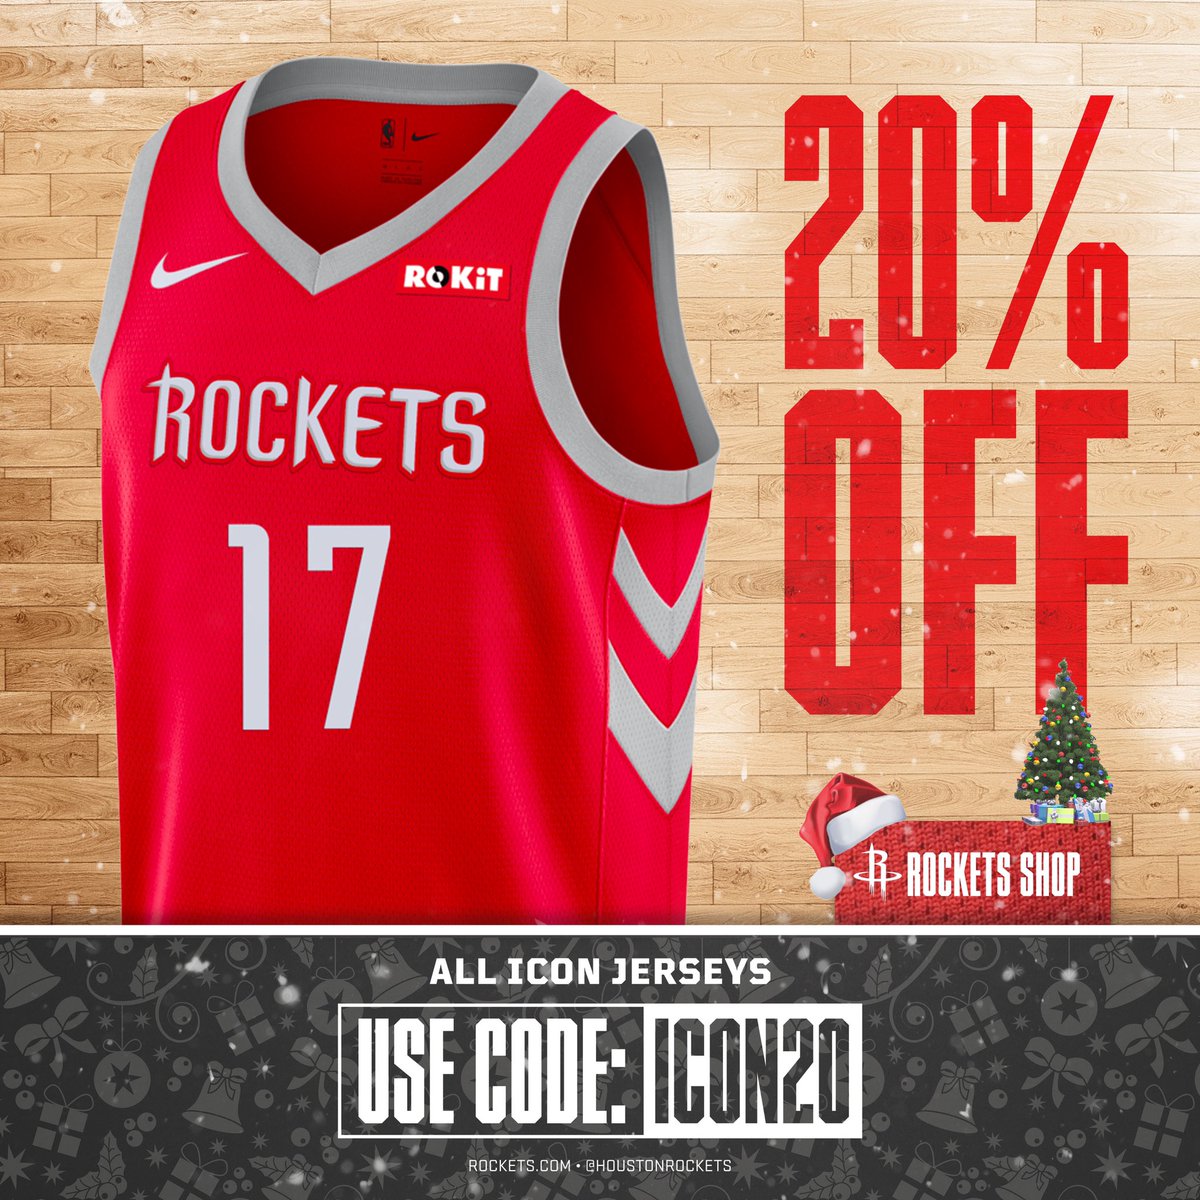 All Nike Icon jerseys are 20% OFF!  Use Code: ICON20  🚀 » RocketsShop.com https://t.co/javMRJefMg